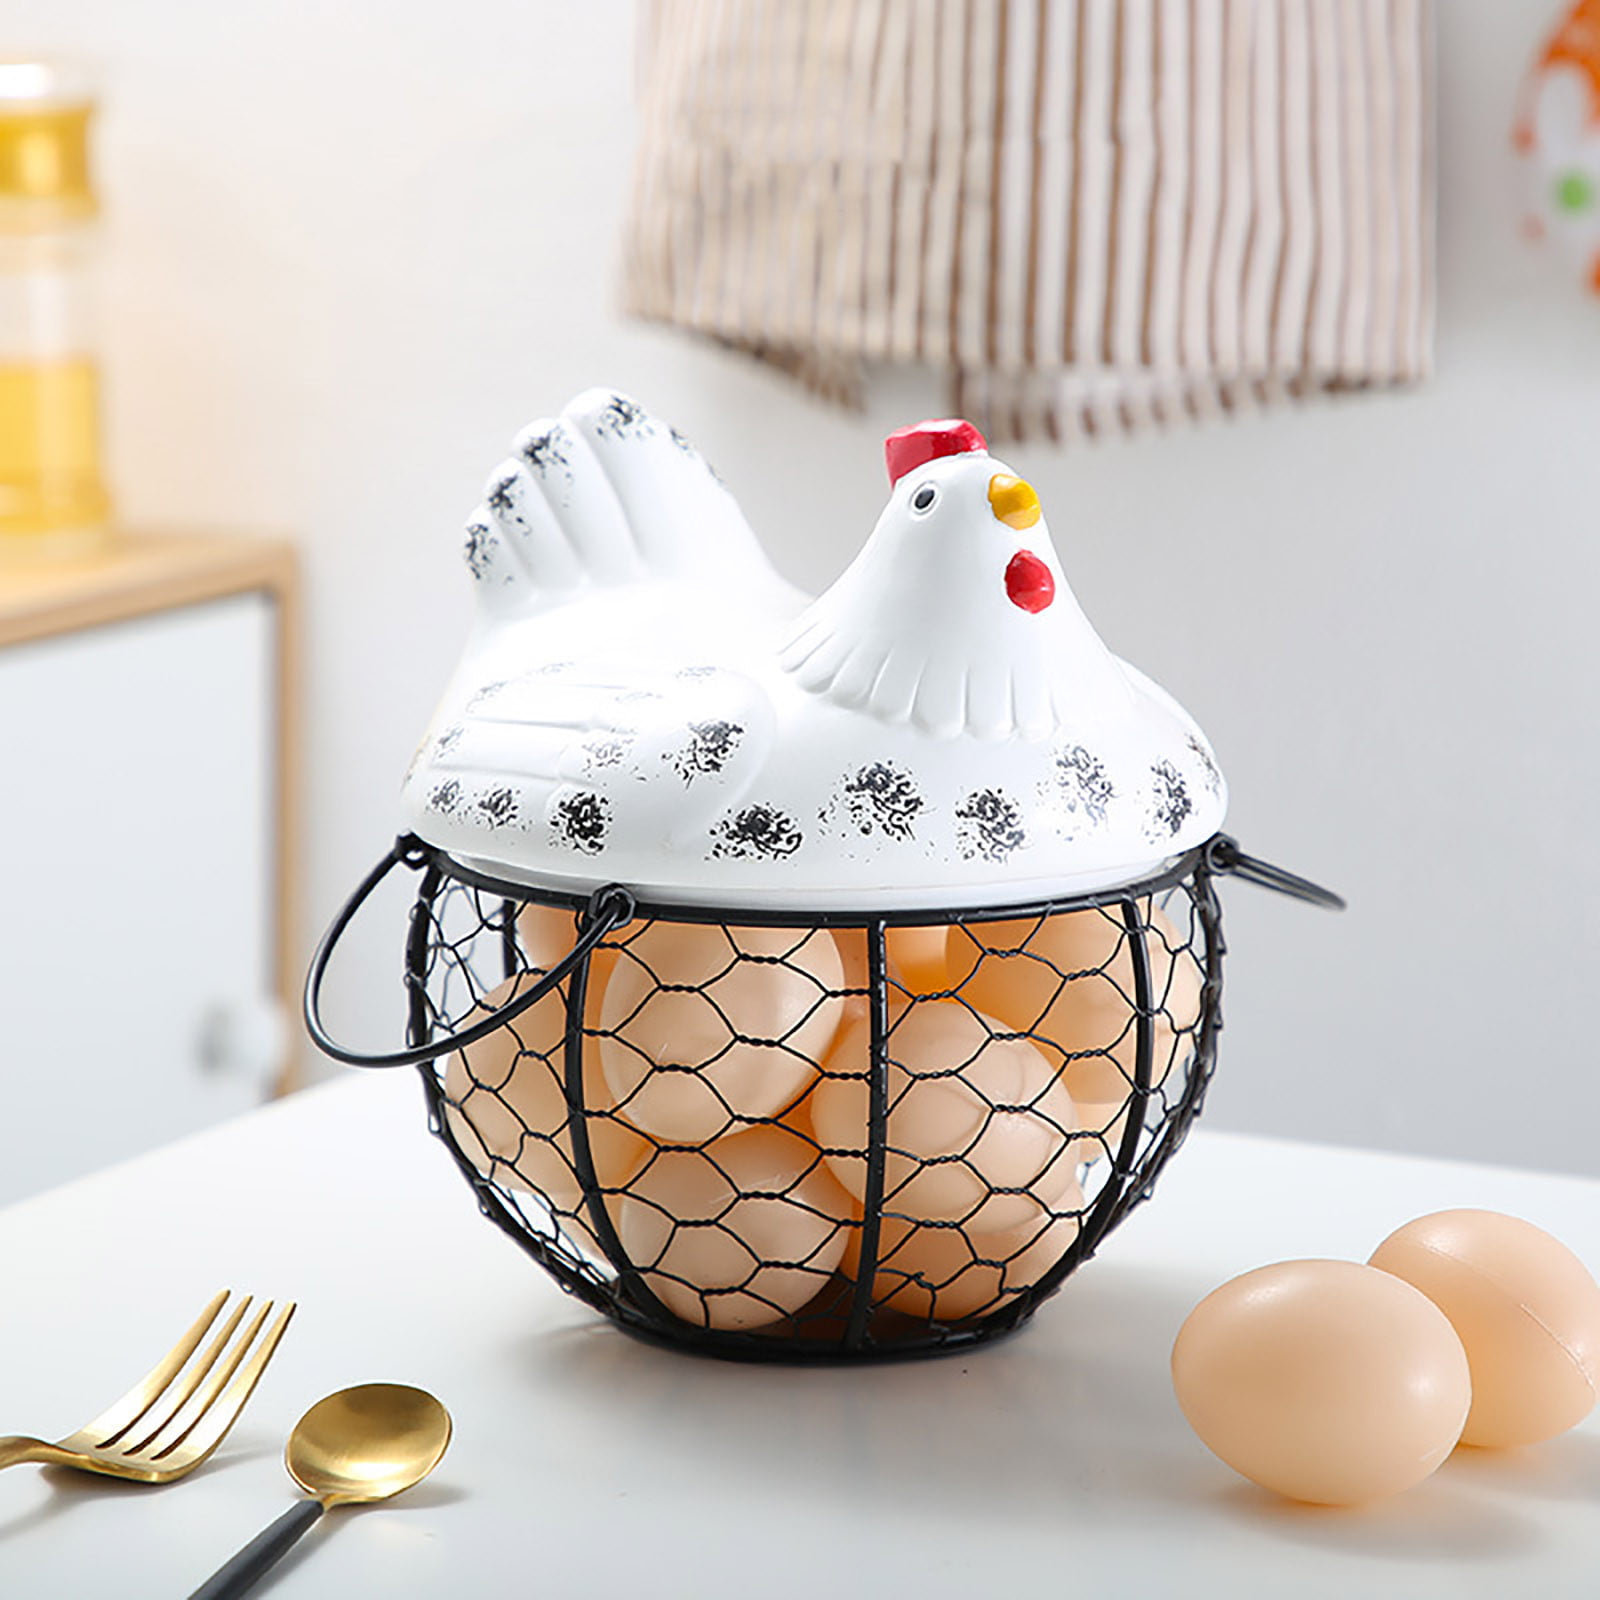  Round Chicken Wire Egg Baskets, Rustic Metal Egg Baskets for  Fresh Eggs with Handle, Egg Holder Countertop Basket with Ceramic Lids,  Country Farmhouse Vintage Style Gathering : Home & Kitchen